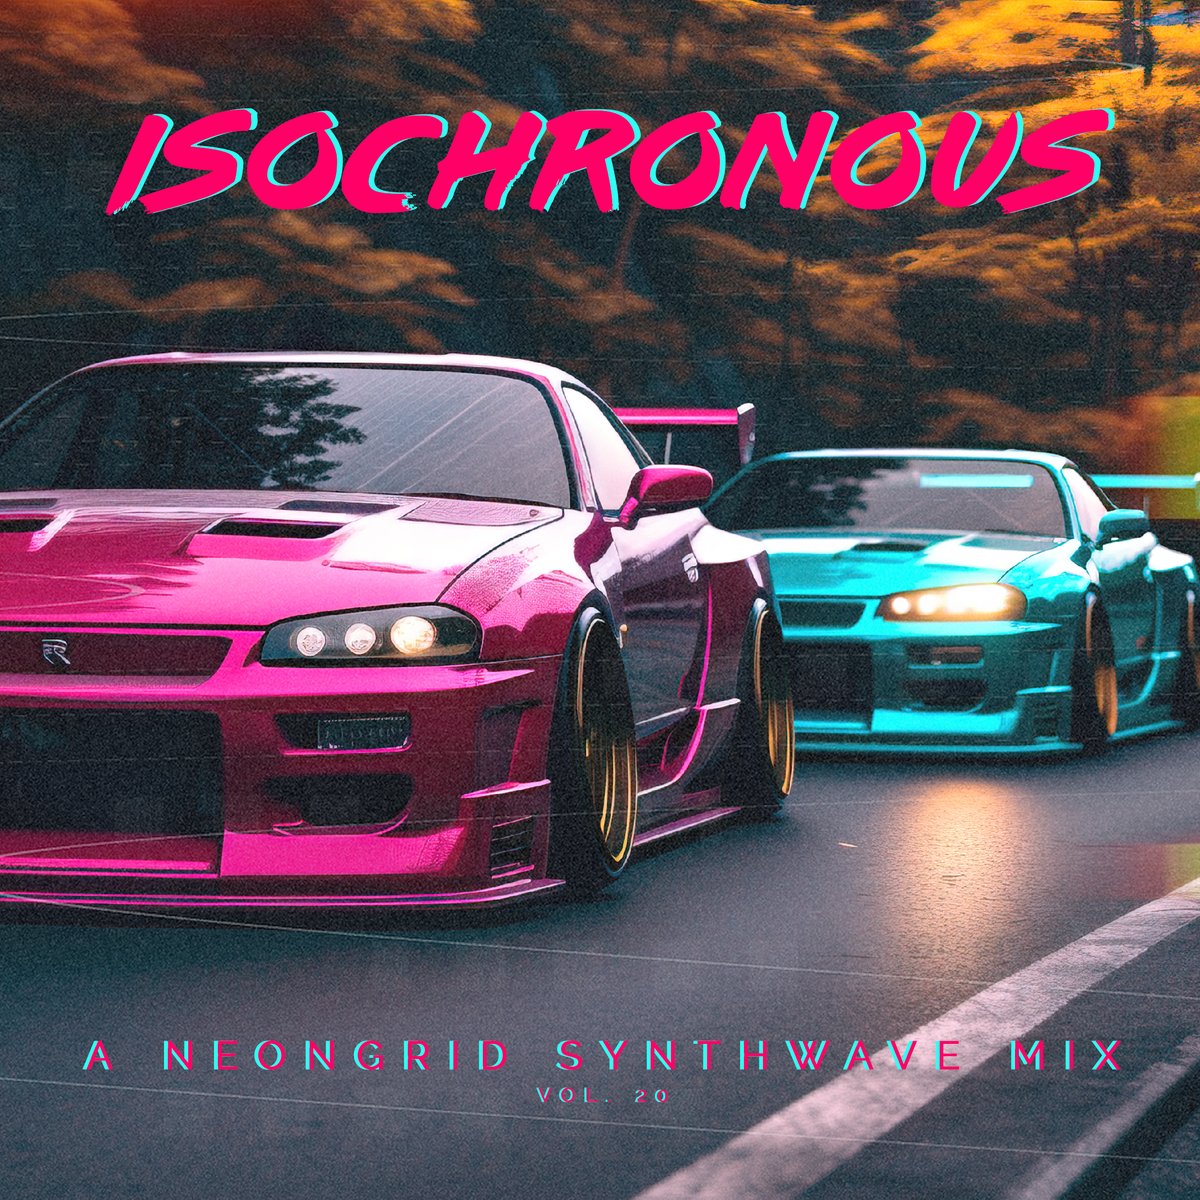 Isochronous - A new Neongrid Mixtape out now!!! 🔥🔥 youtu.be/ja6JWOqTekA 🔥🔥 Featuring: @fmattack @TENEBRAN1 @ANMEOM1 @NR87_Official #Zypnix @kotovsky86 @KARR16748571 @turbo_knight #ElectricDarkSouls @Edictum303 @OmegaMegadrive #synestial #synthwave #synthwavemix